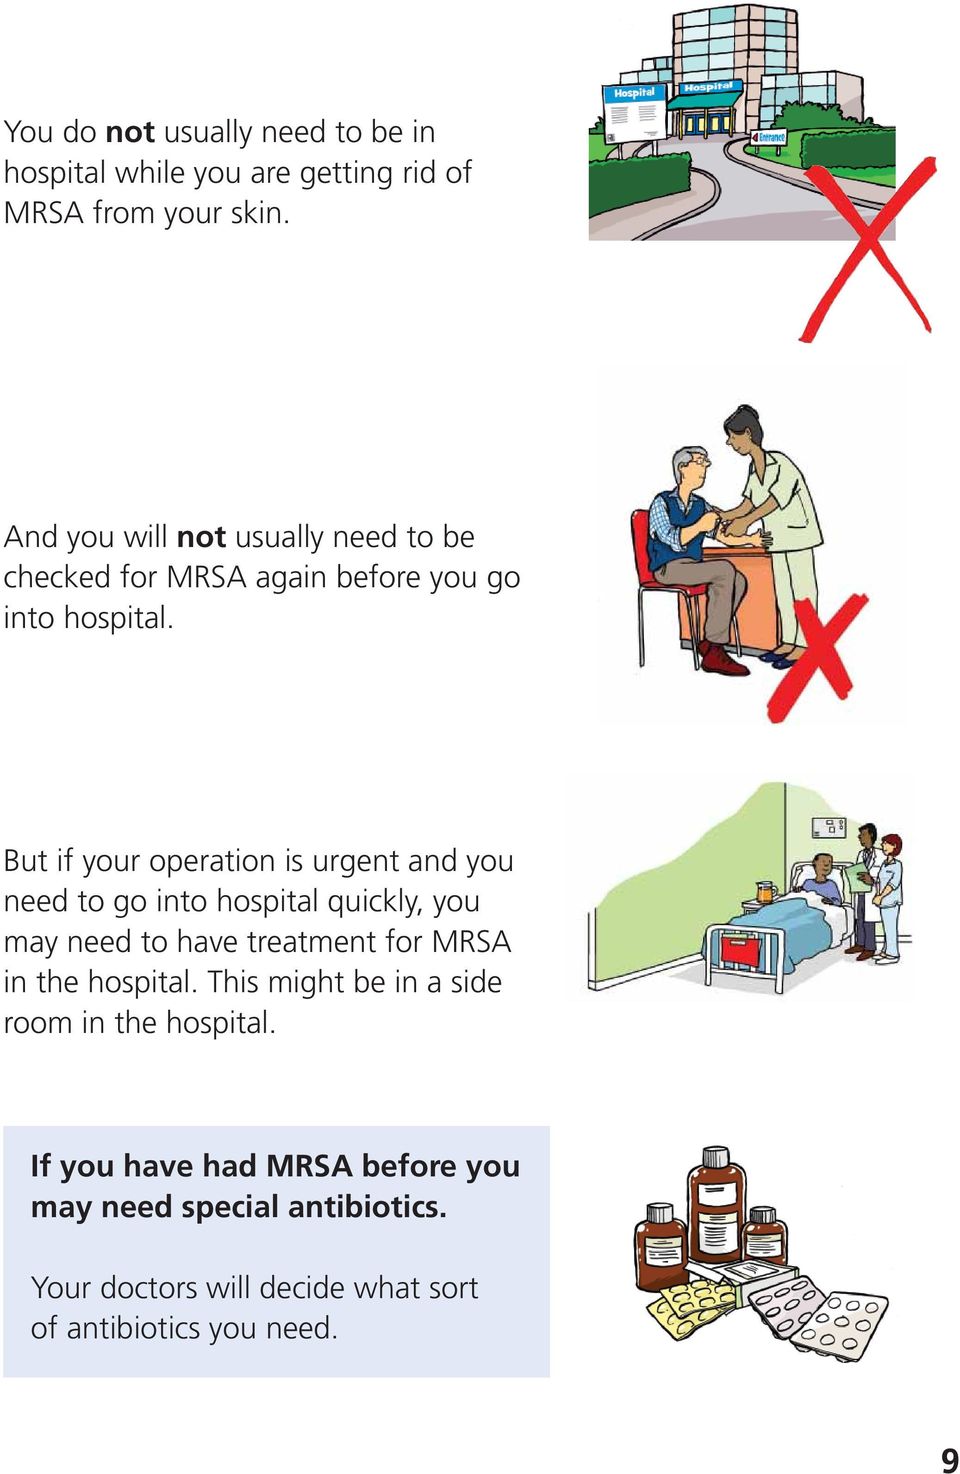 But if your operation is urgent and you need to go into hospital quickly, you may need to have treatment for MRSA in